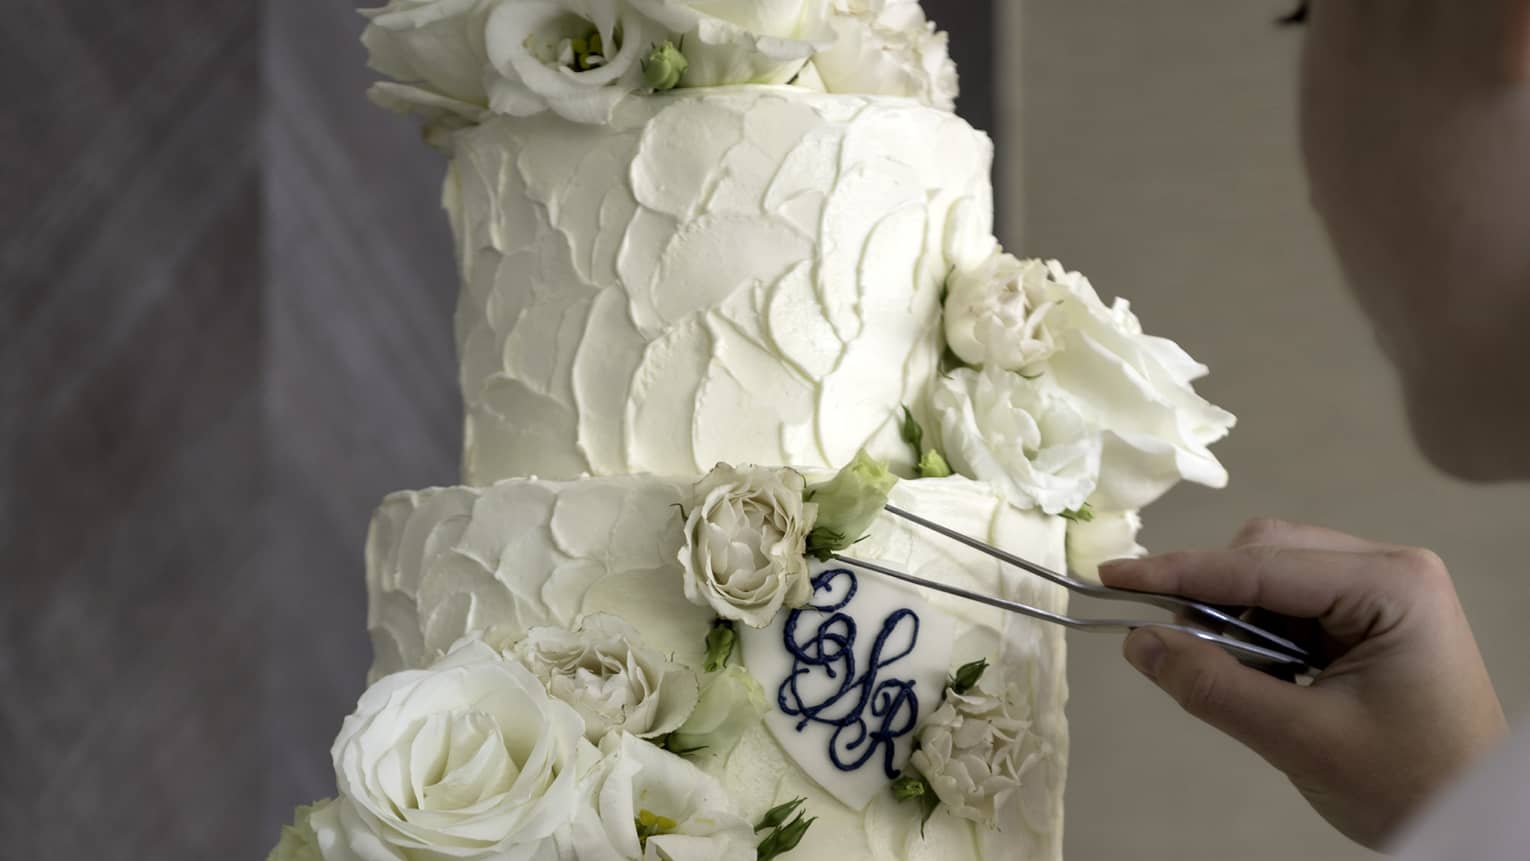 Chef places rose garnish on four tier white wedding cake